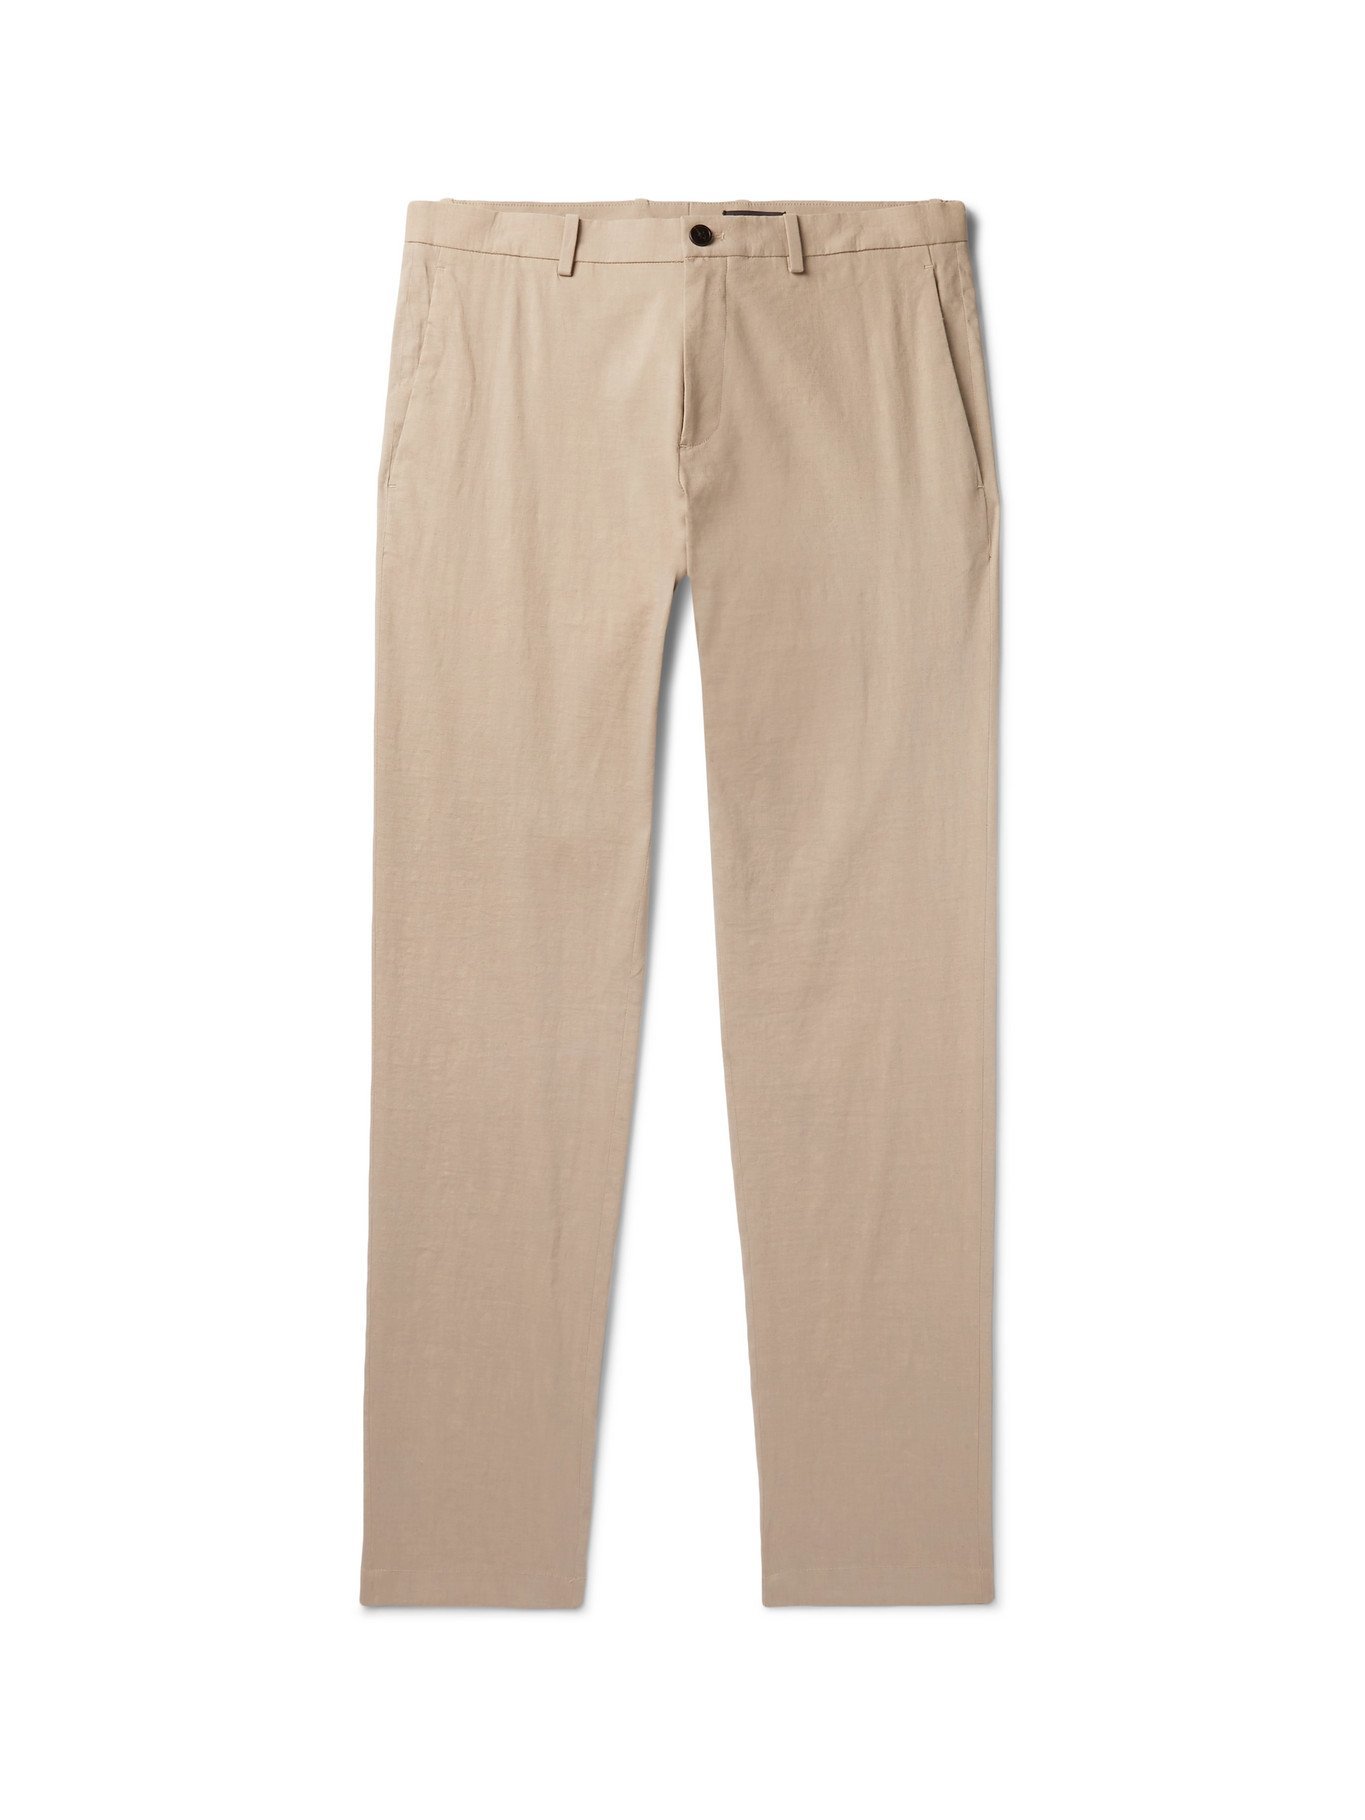 THEORY - Zaine Slim-Fit Linen-Blend Trousers - Neutrals Theory